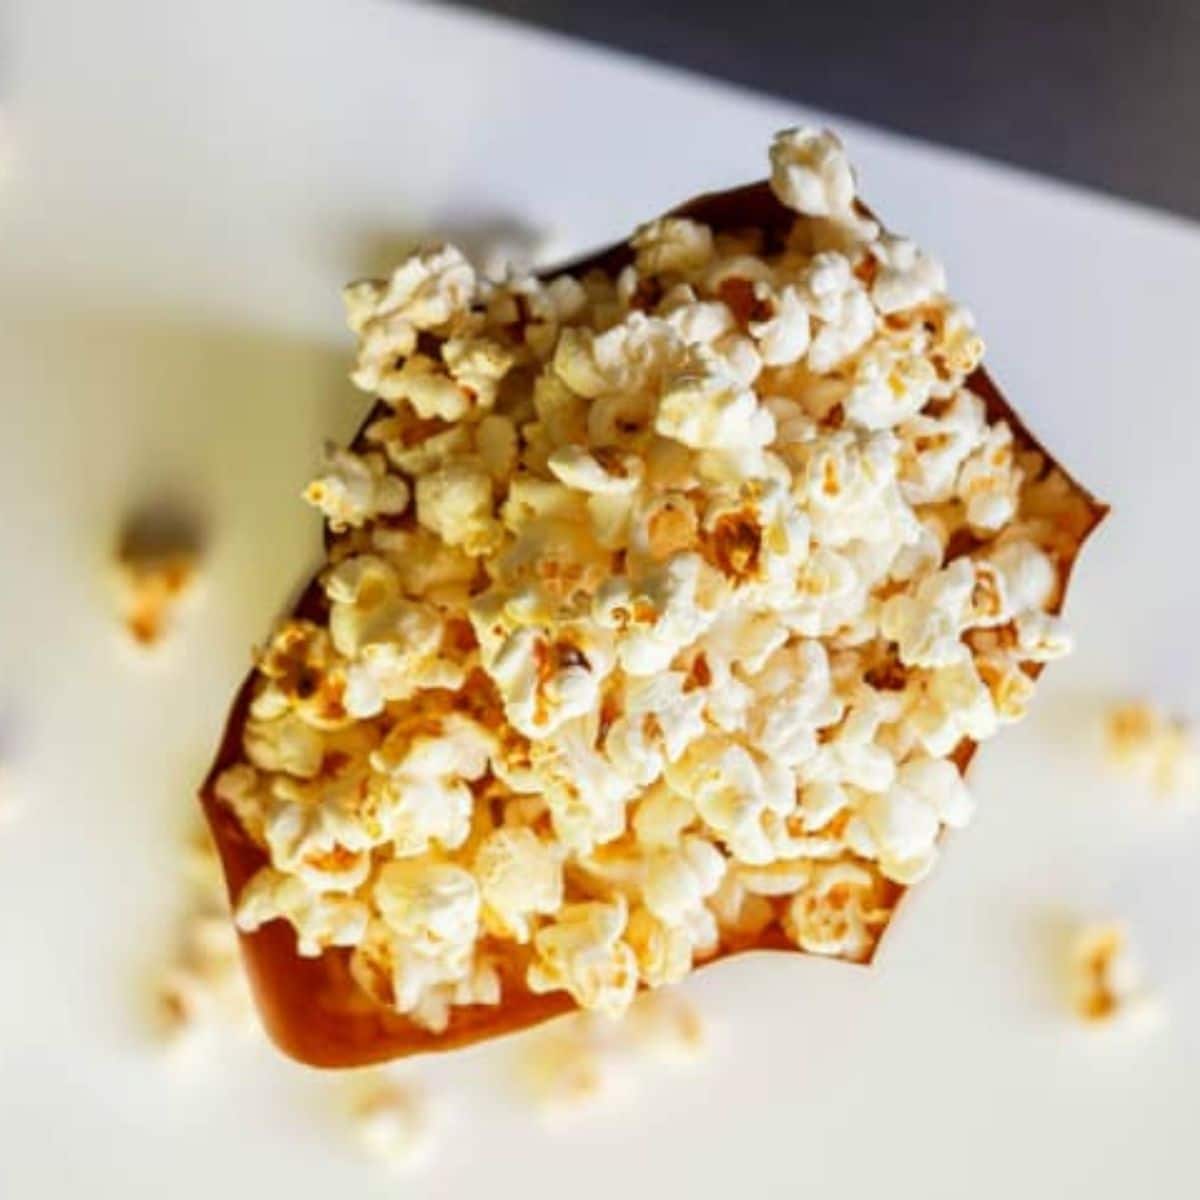 https://thecookiewriter.com/wp-content/uploads/2014/03/easy-healthy-stove-popcorn-featured.jpg